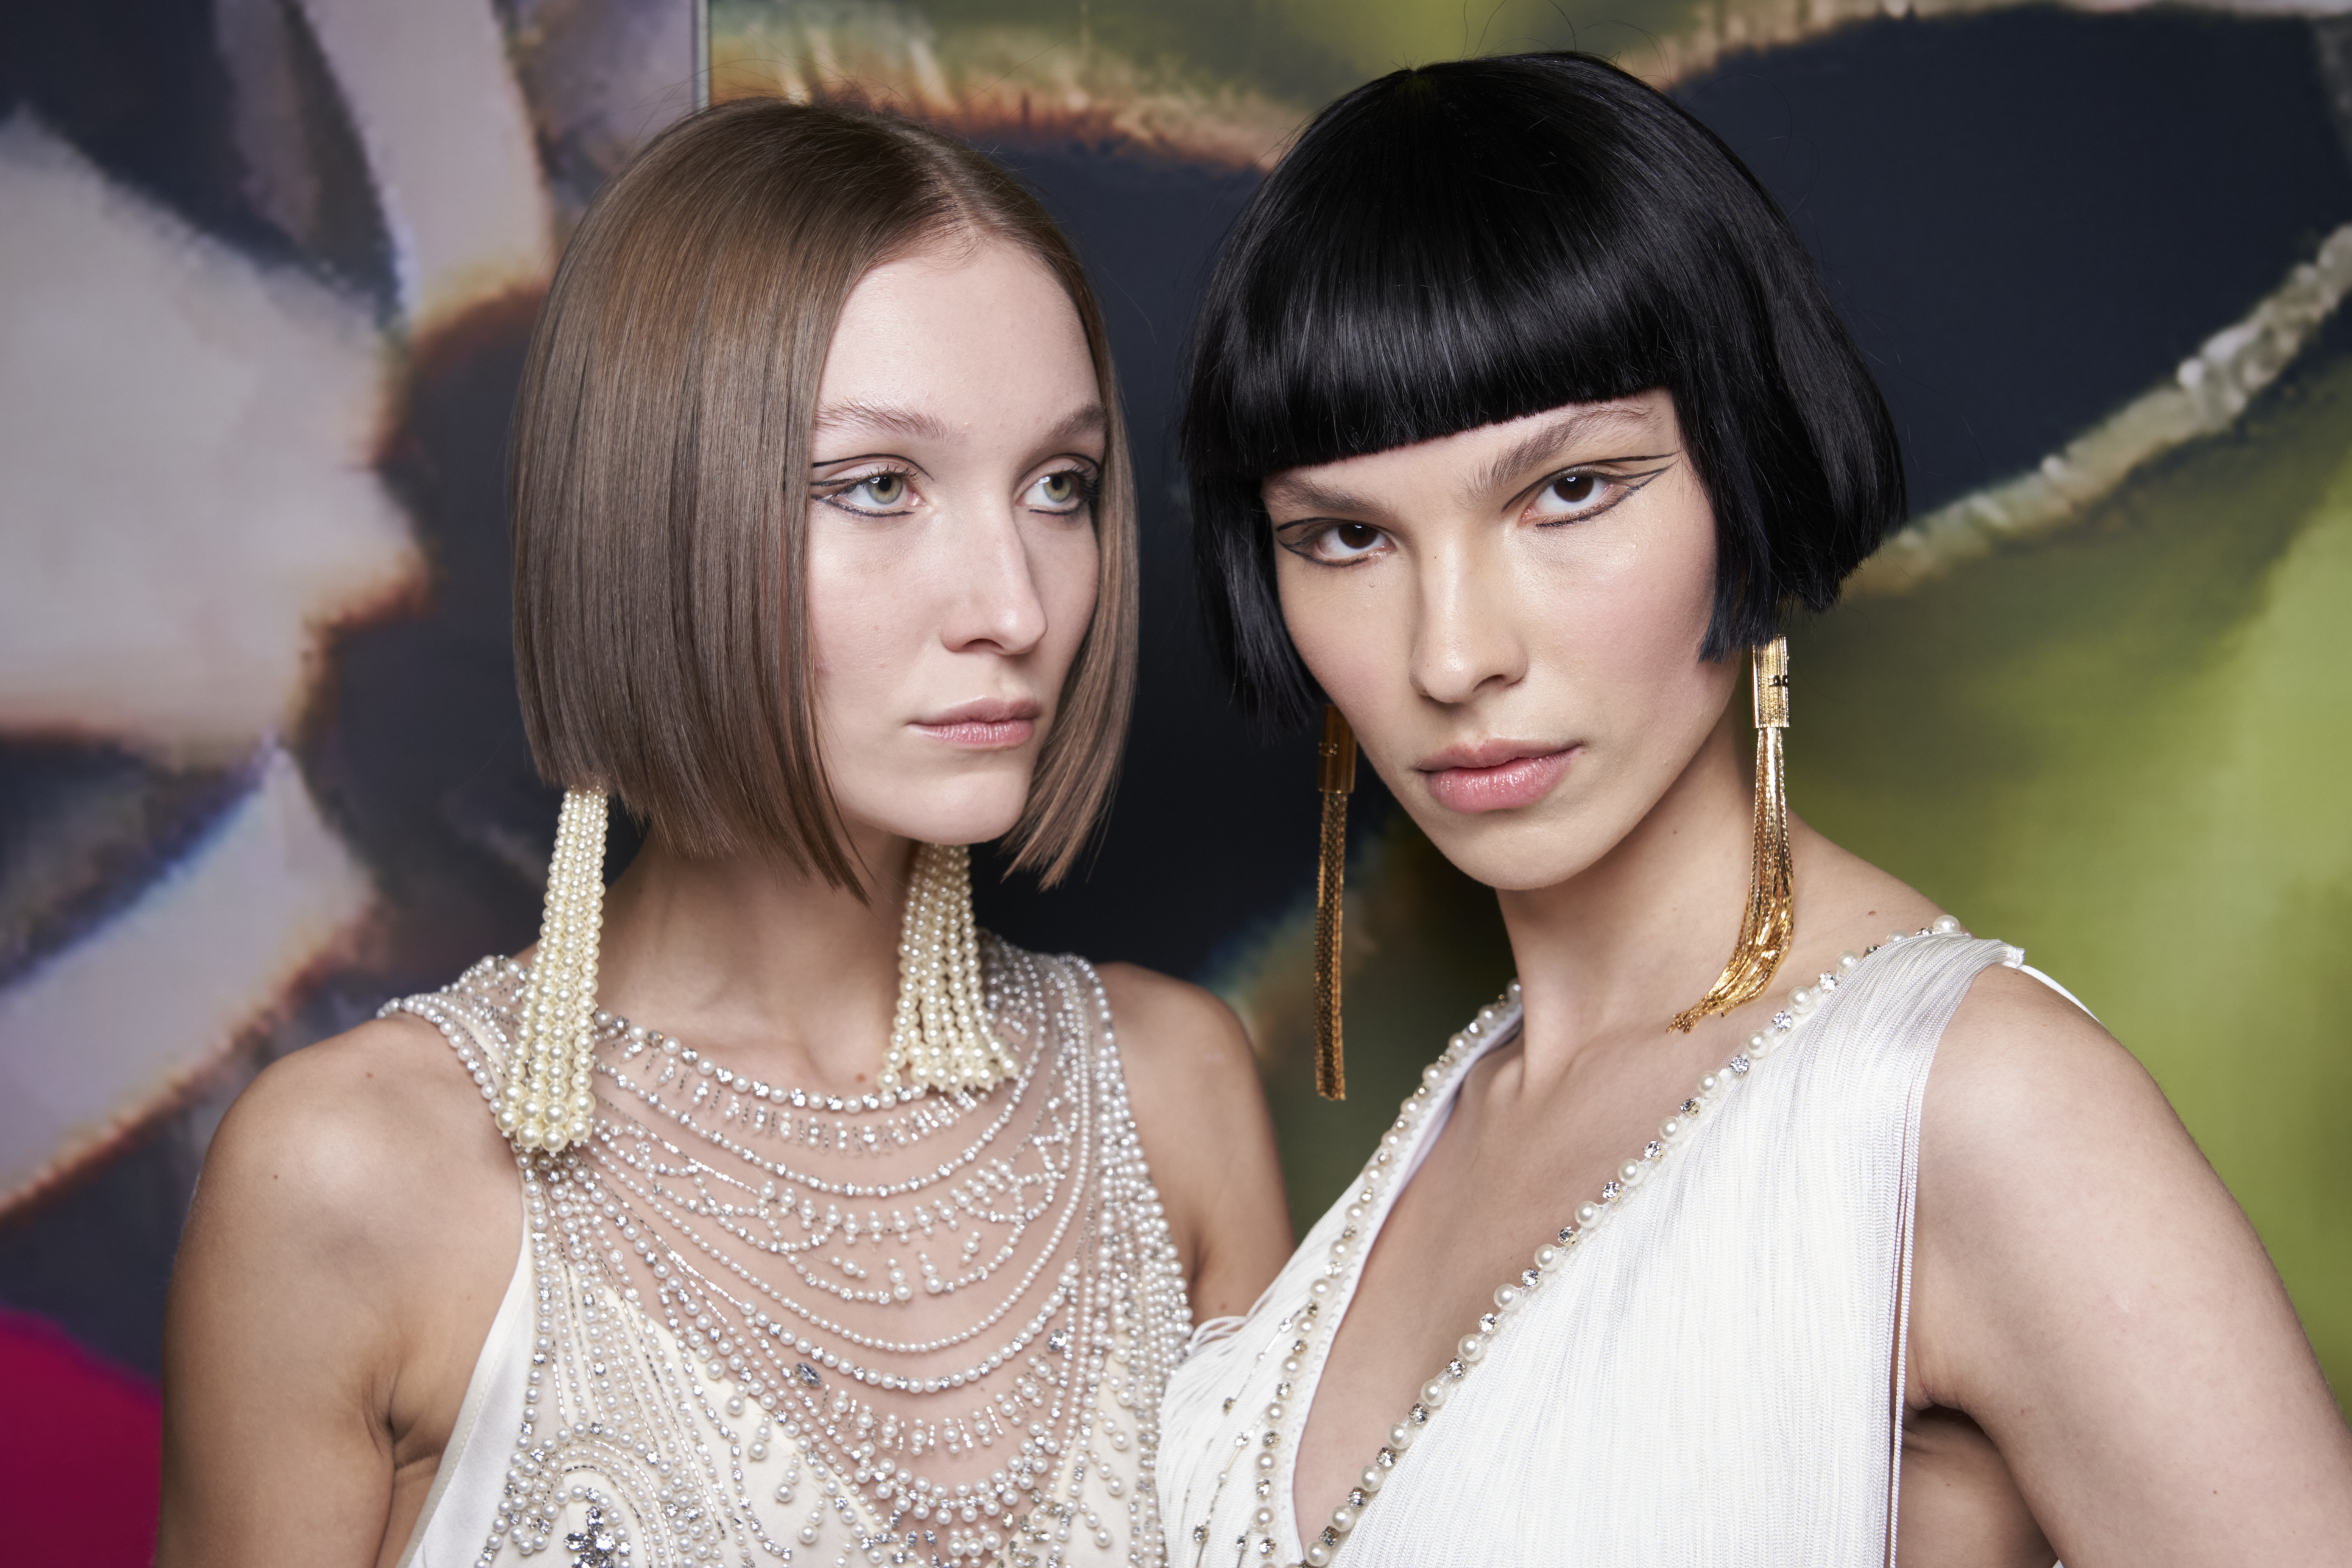 Two models at the Elisabetta Franchi fashion show.